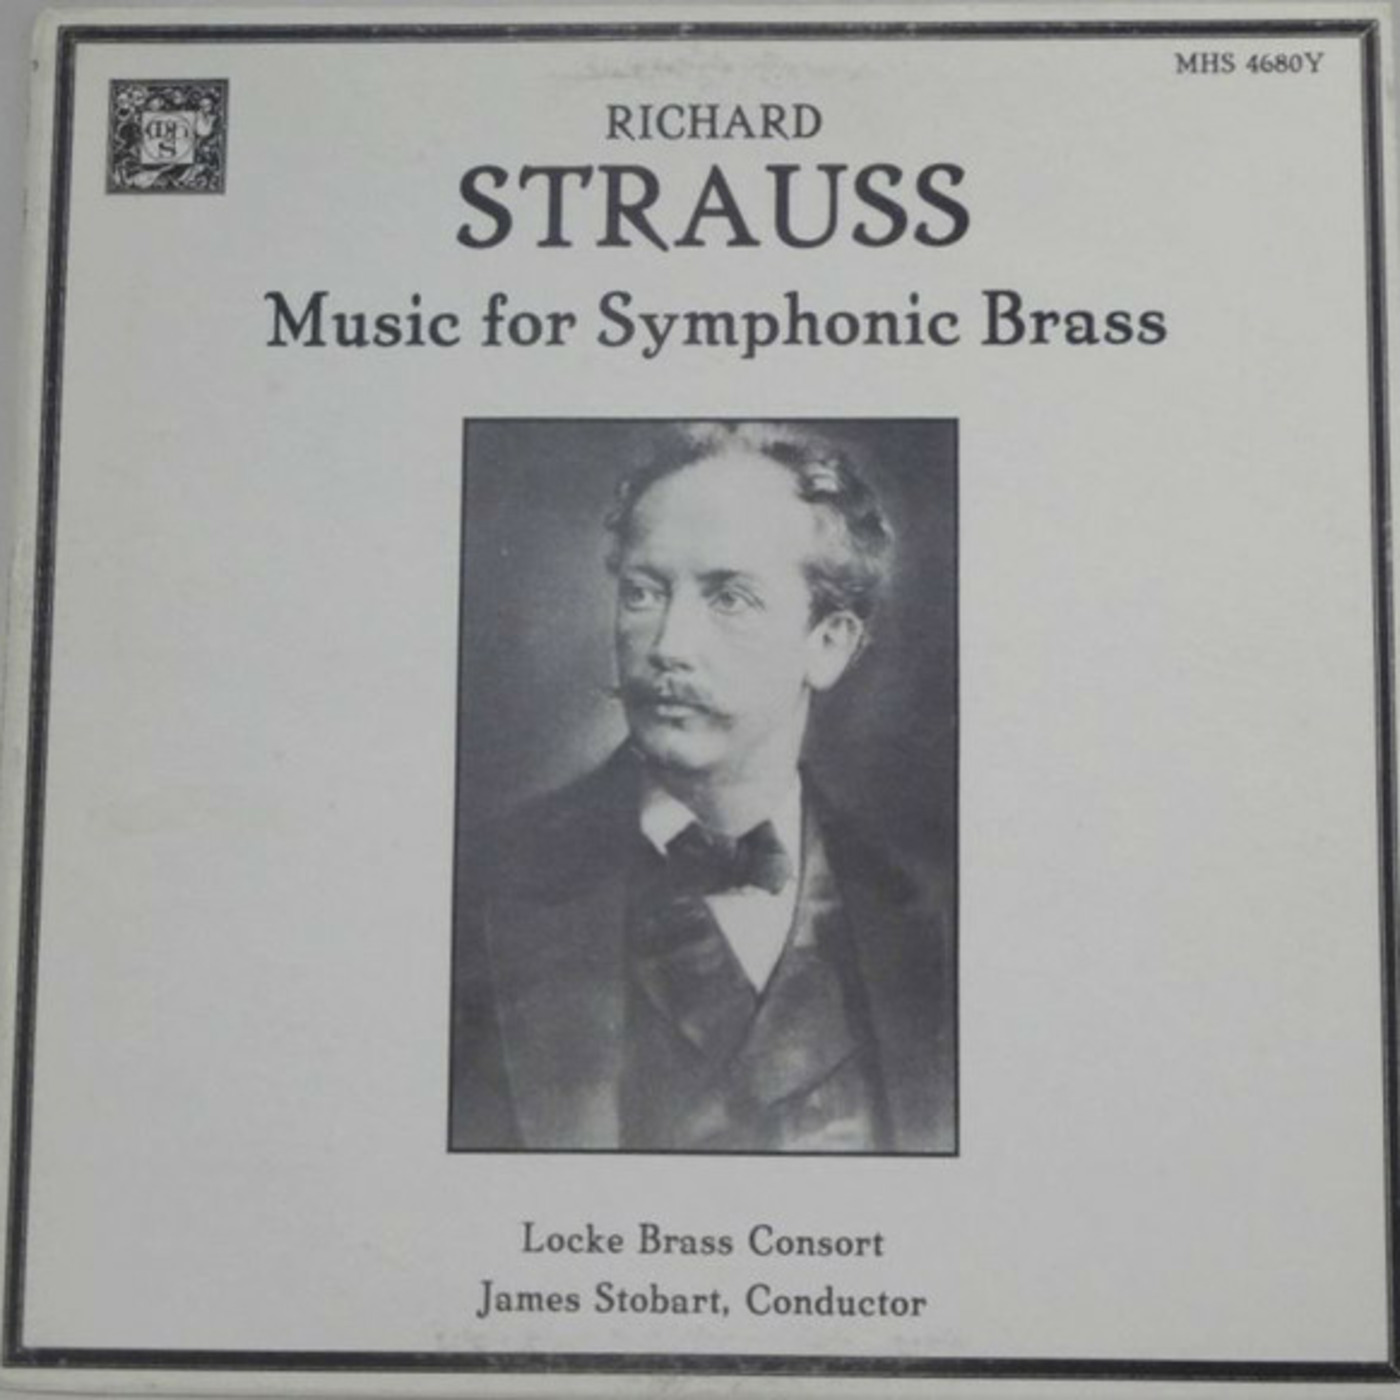 Episode 177: 17177 R. Strauss: Music for Symphonic Brass